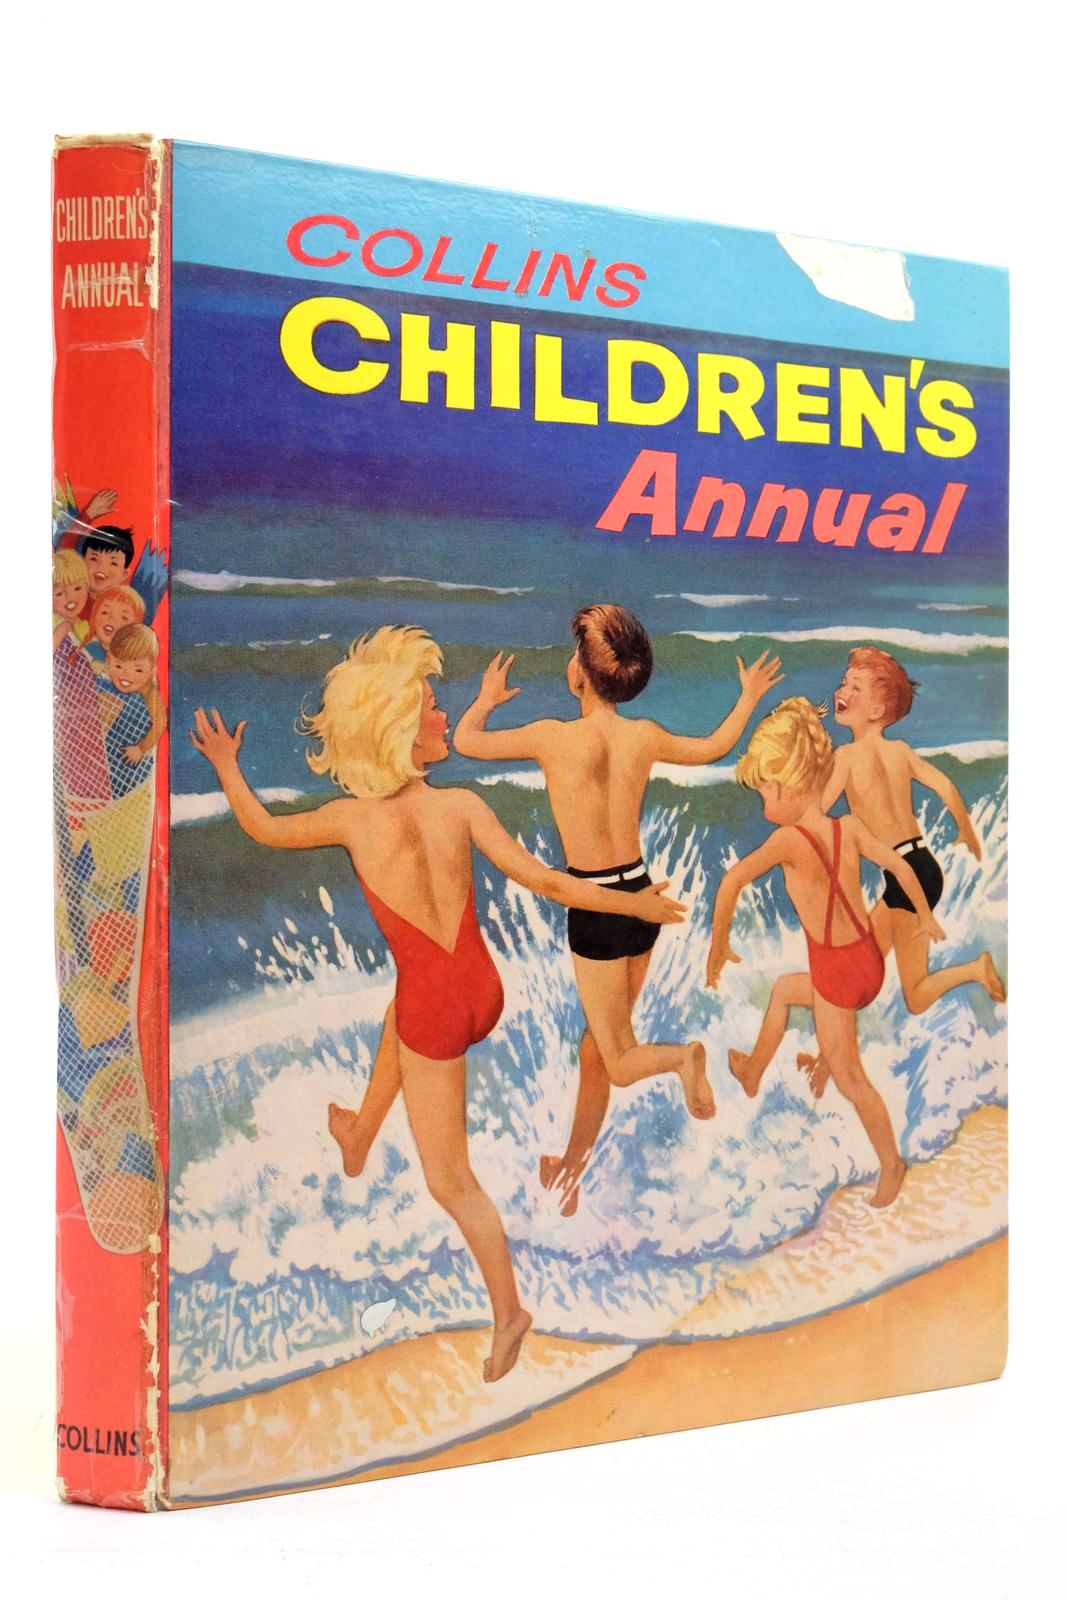 Photo of COLLINS CHILDREN'S ANNUAL written by Cayley, Mary C.
Fraser, Edith
Glanville, Elizabeth
Helps, Racey
Cloke, Rene
et al, illustrated by Heap, Jean Walmsley
Lodge, Grace
Whittam, Geoffrey
McGavin, Hilda
Helps, Racey
Cloke, Rene
et al., published by Collins (STOCK CODE: 2138899)  for sale by Stella & Rose's Books